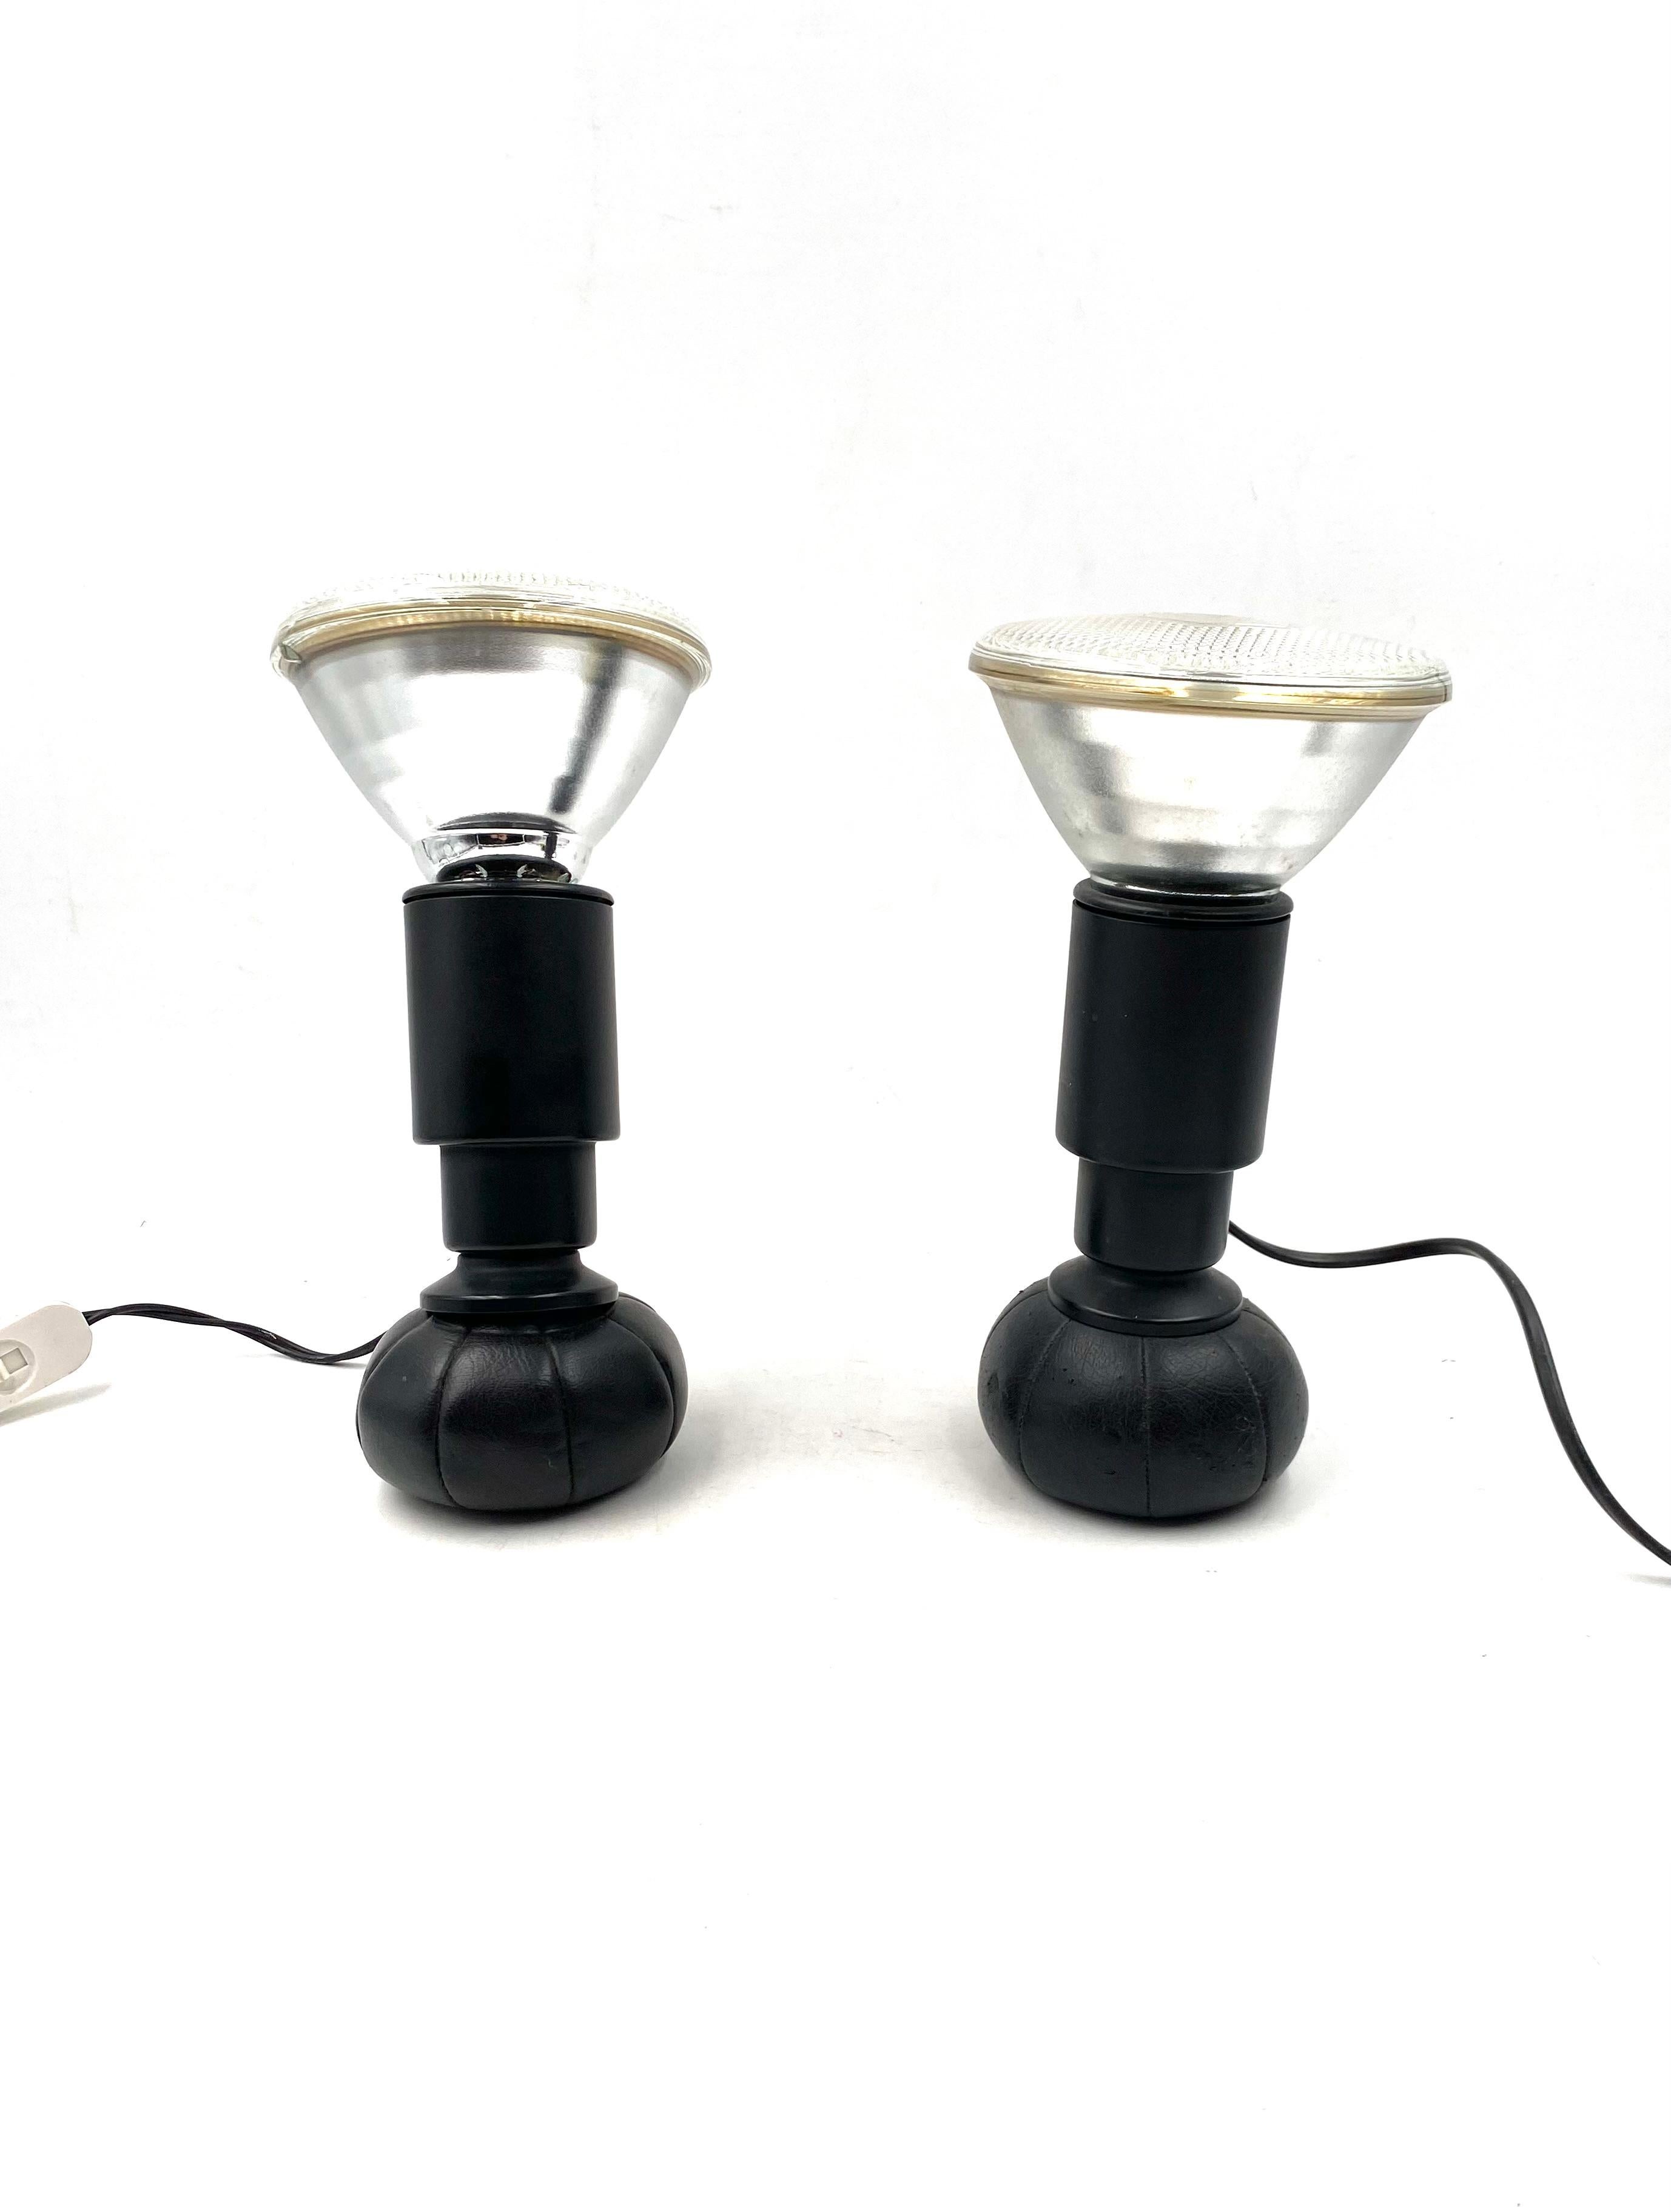 Set of2 black table lamps mod. 600/C designed by master Gino Sarfatti, manufactured by his own Arteluce. 

Designed in 1966, produced 1960 - 1969

Lacquered aluminium. The leather base is filled with small lead balls which allow the lamp to move